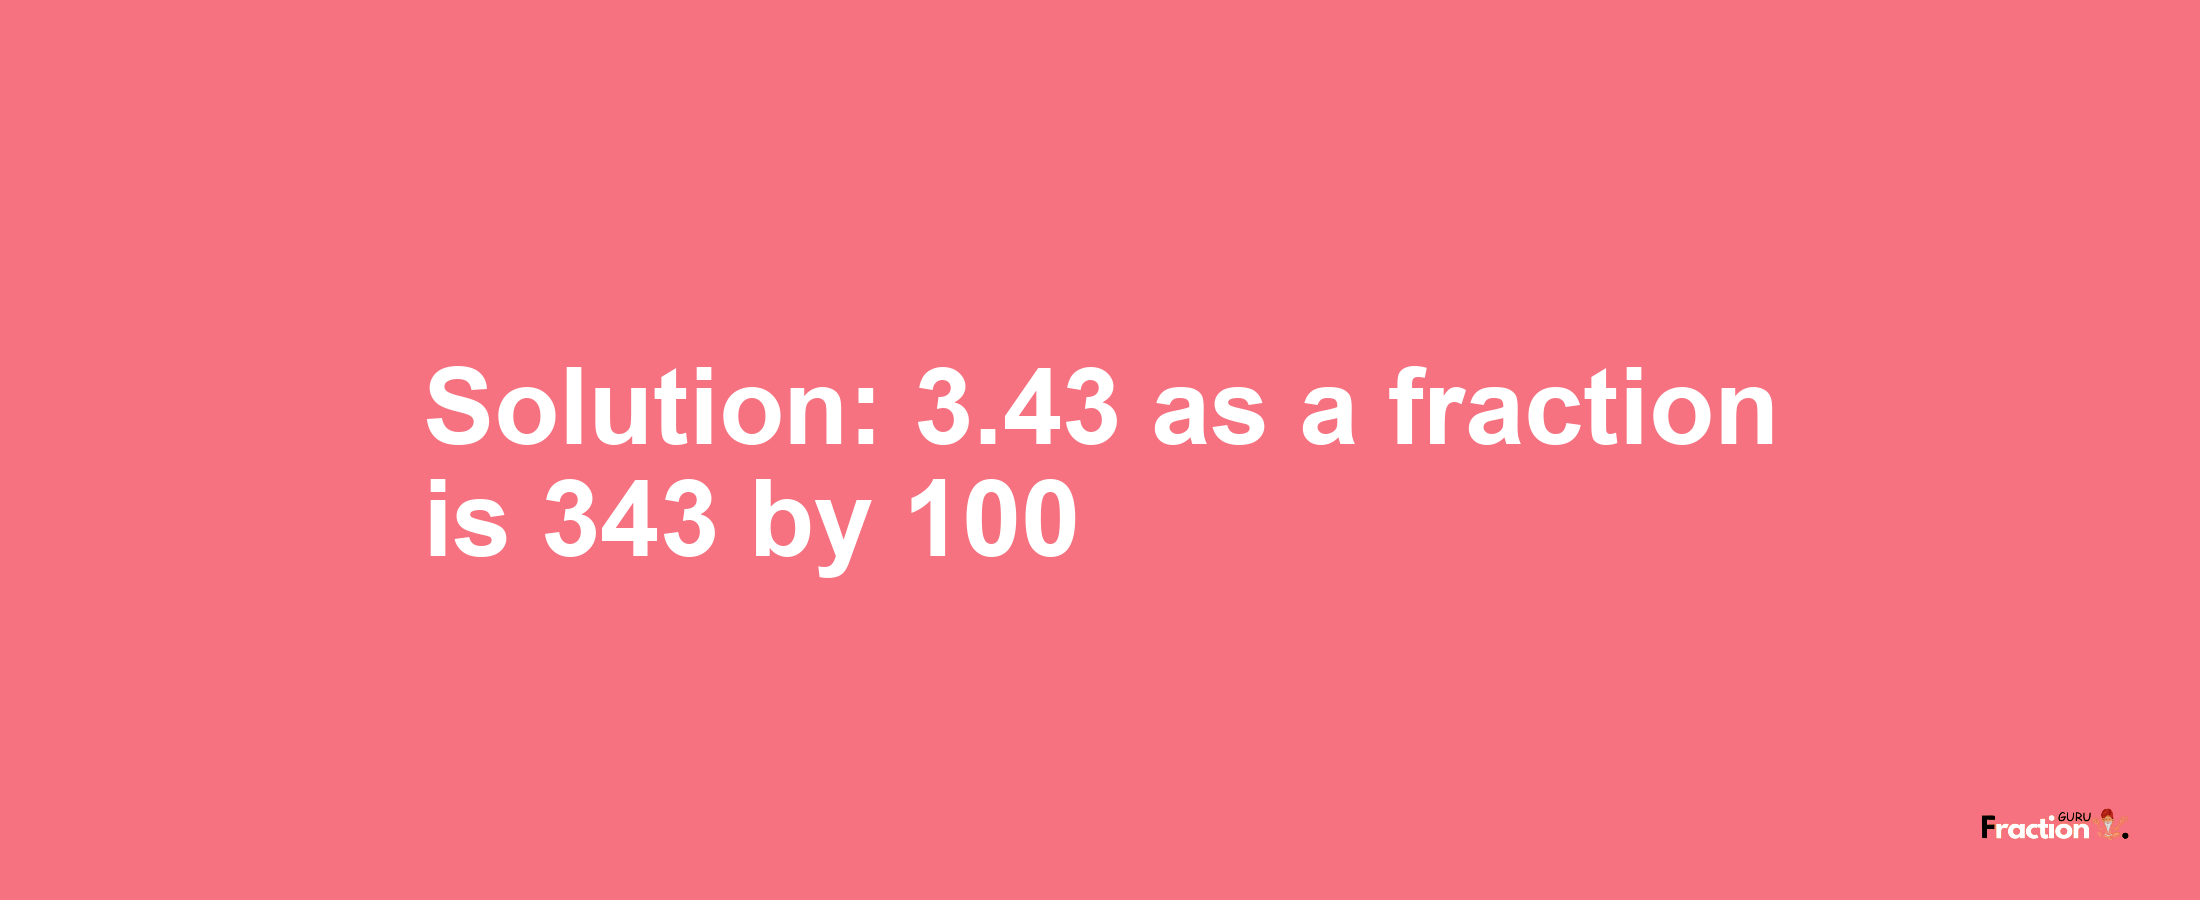 Solution:3.43 as a fraction is 343/100